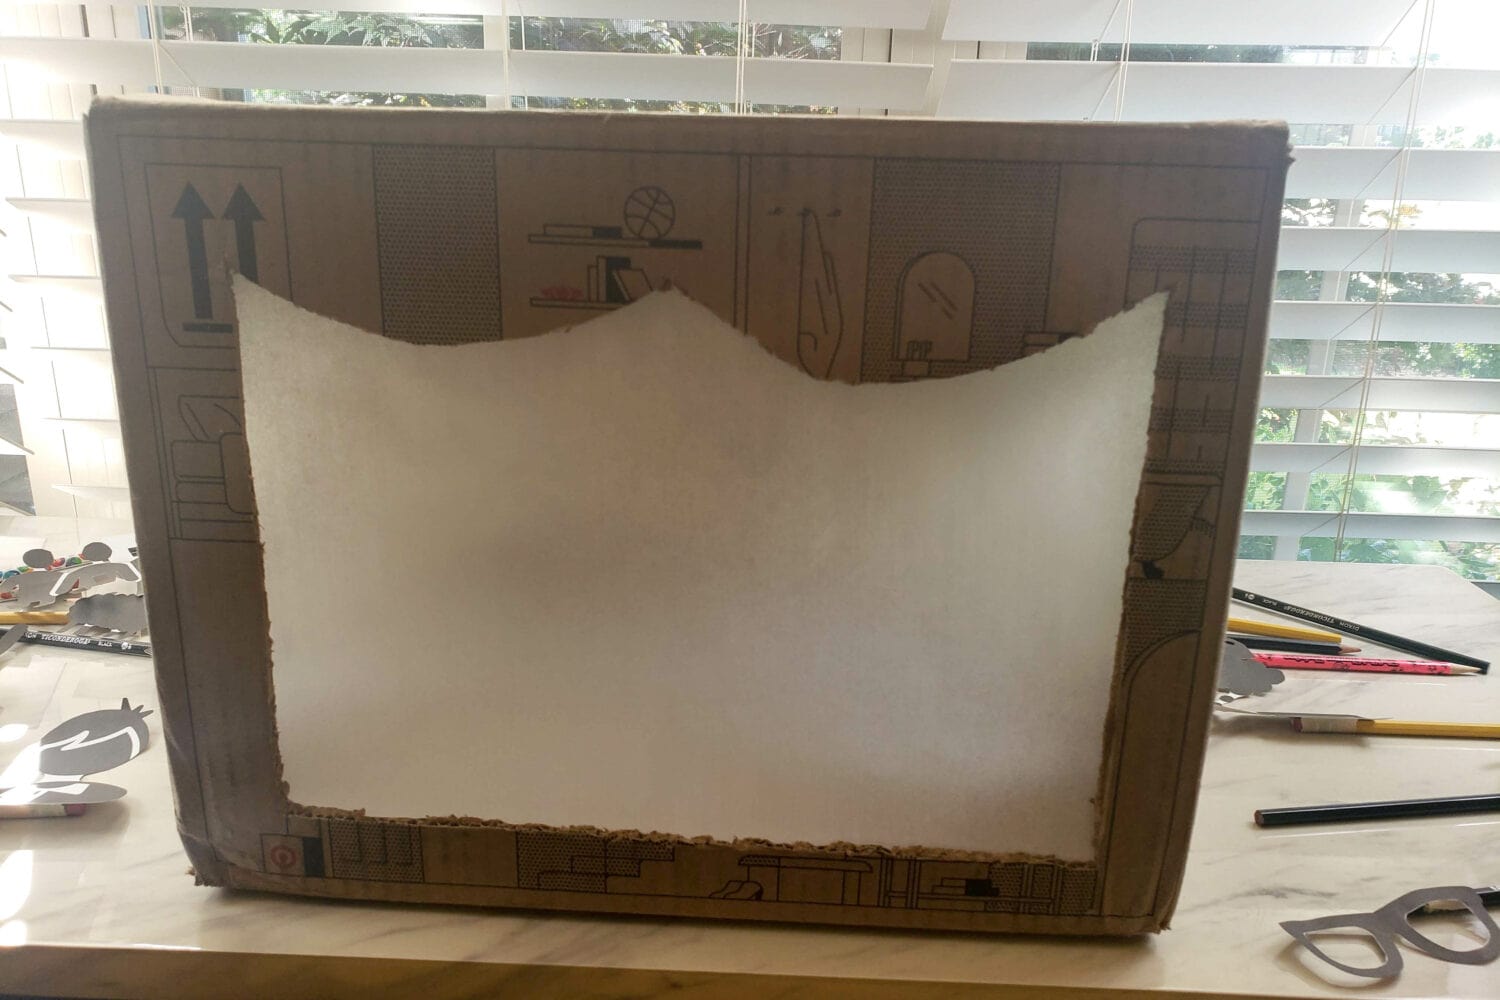 How to Make a Shadow Puppet DIY Tutorial with step-by-step directions to easily make your own shadow puppet theater with what you have around the home! Shadow puppet theater screen cardboard box